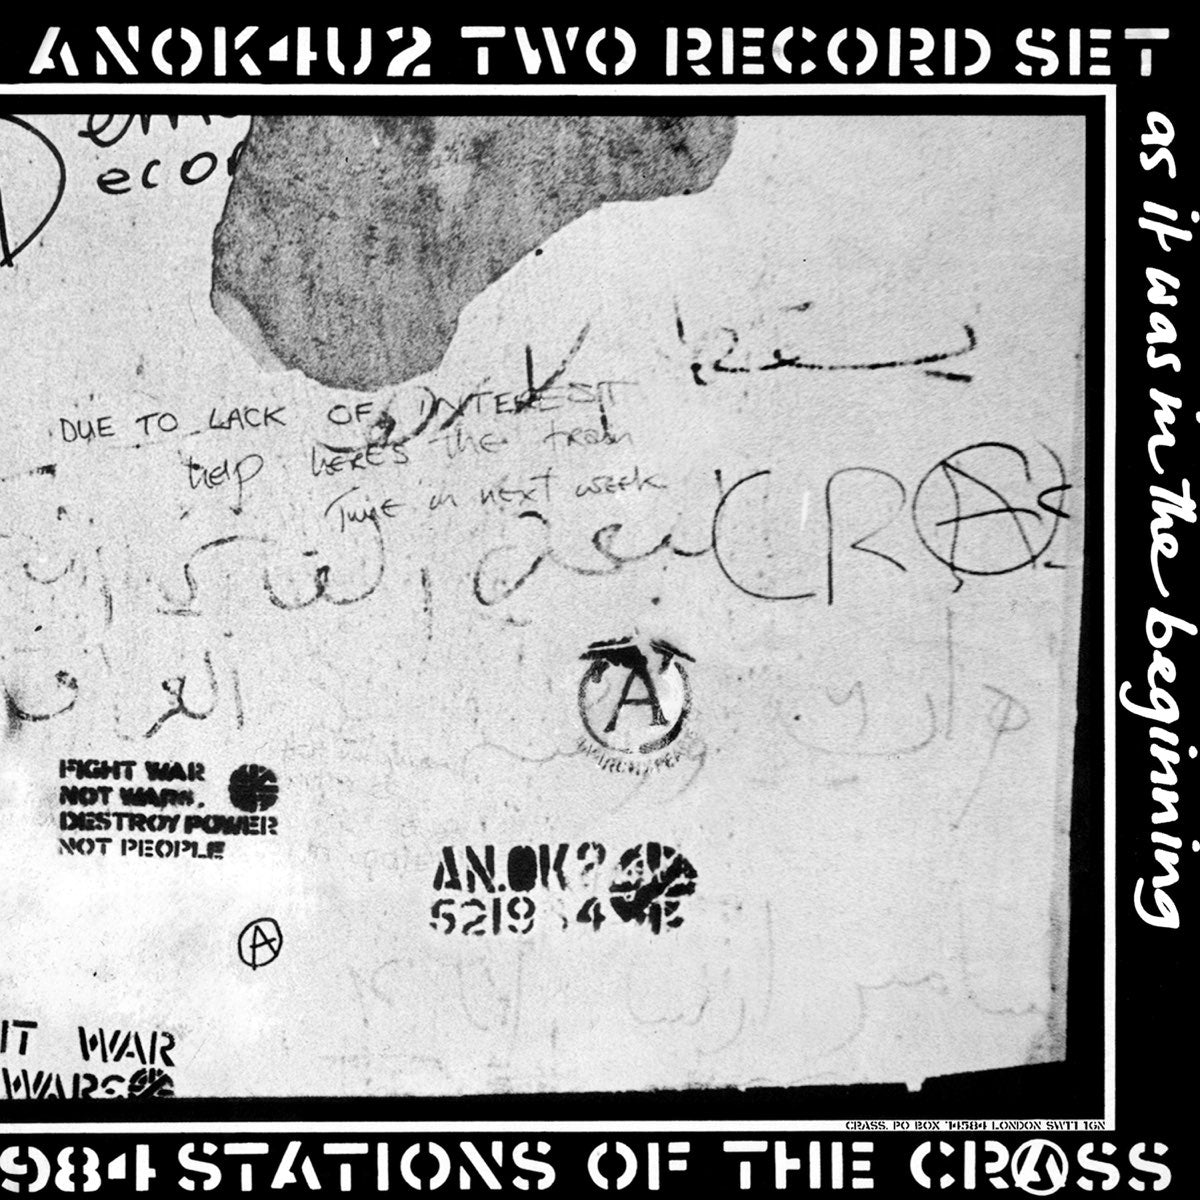 Station of the crass, vinyle et poster, CRASS